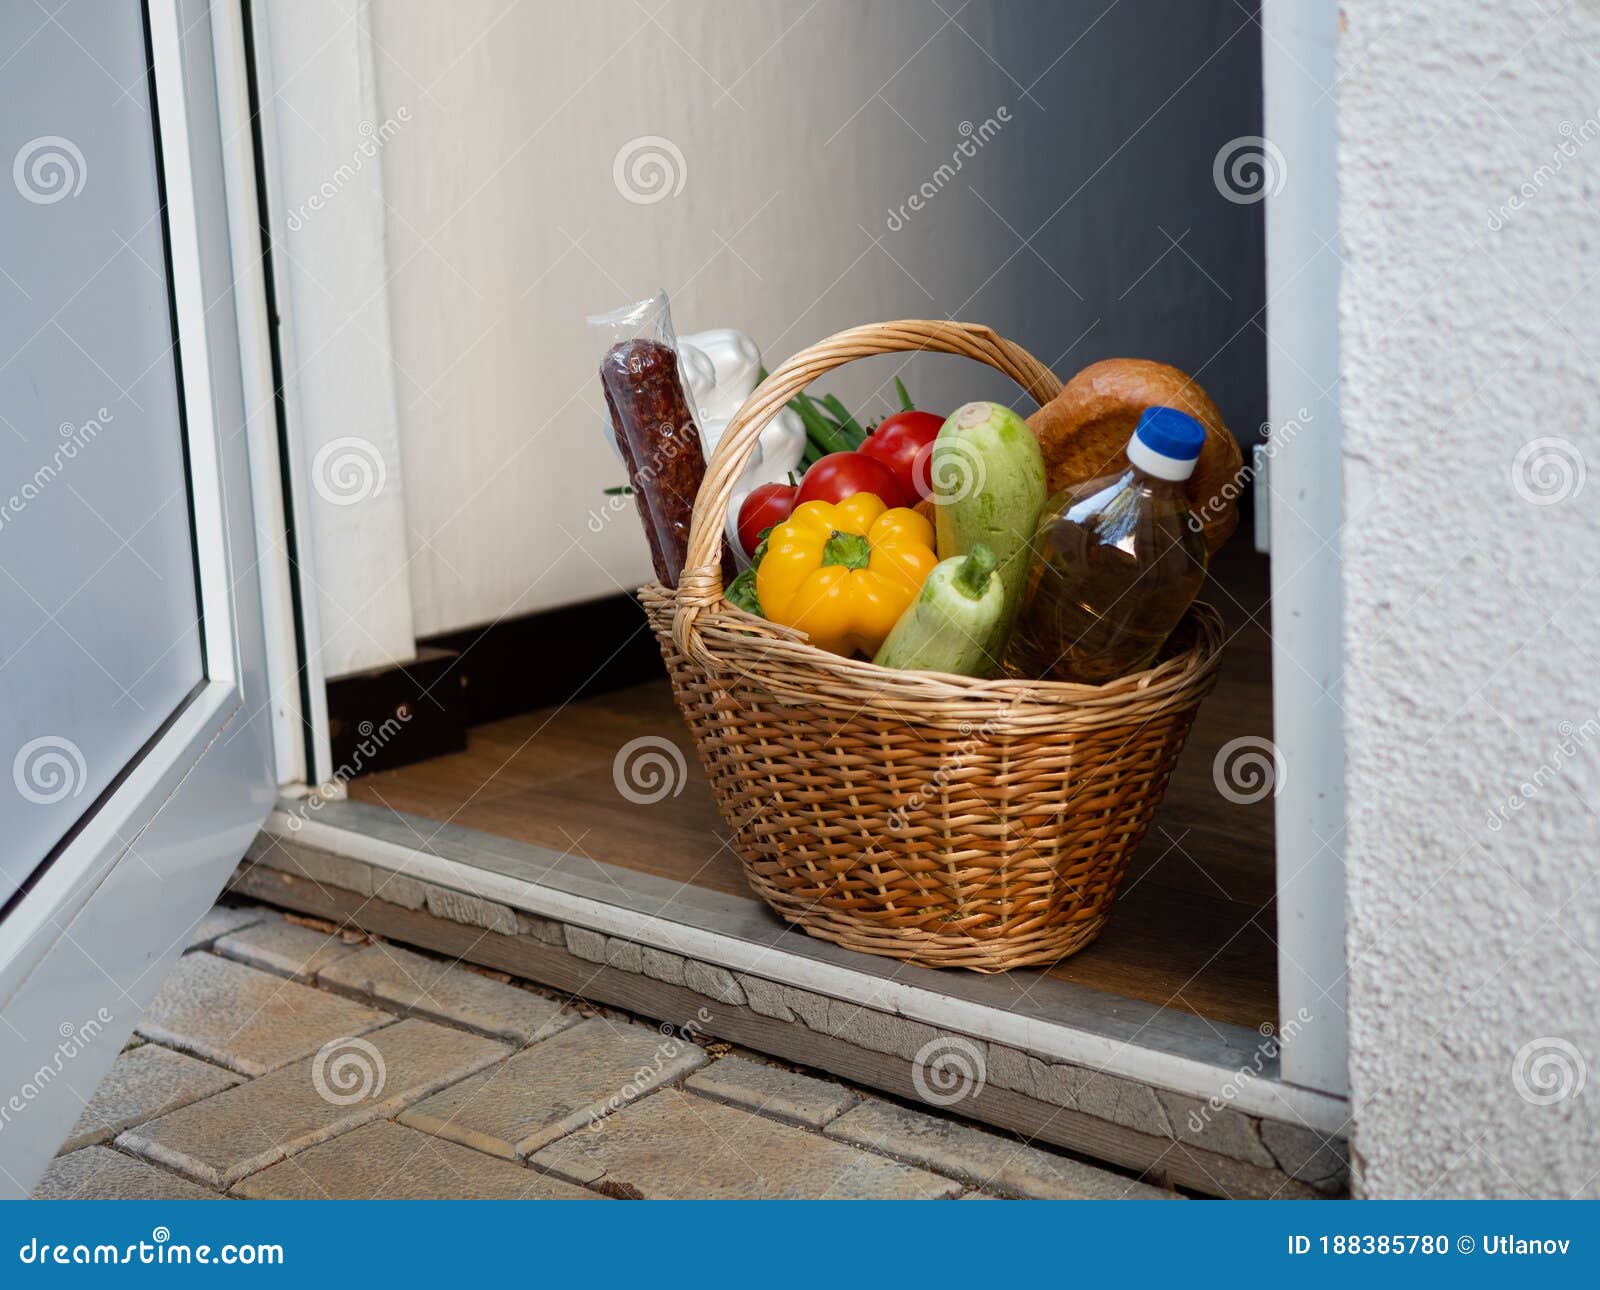 Baby In A Basket On A Doorstep Stock Photo, Picture and Royalty Free Image.  Image 15440807.